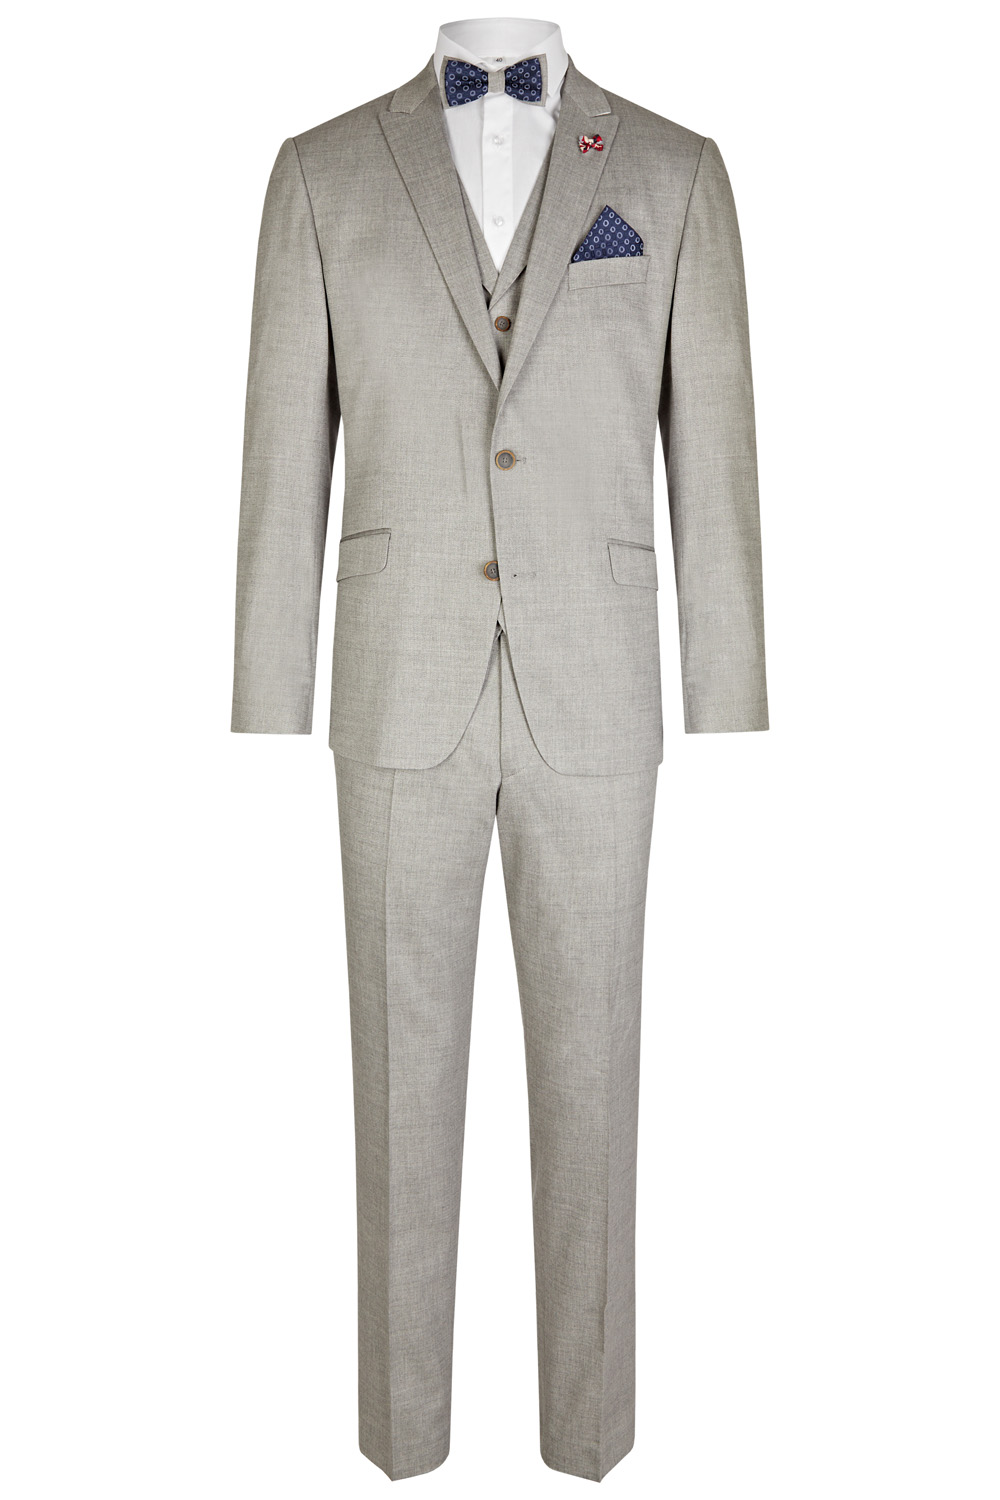 Silver Vintage 3 Piece Wedding Suit - Tom Murphy's Formal and Menswear